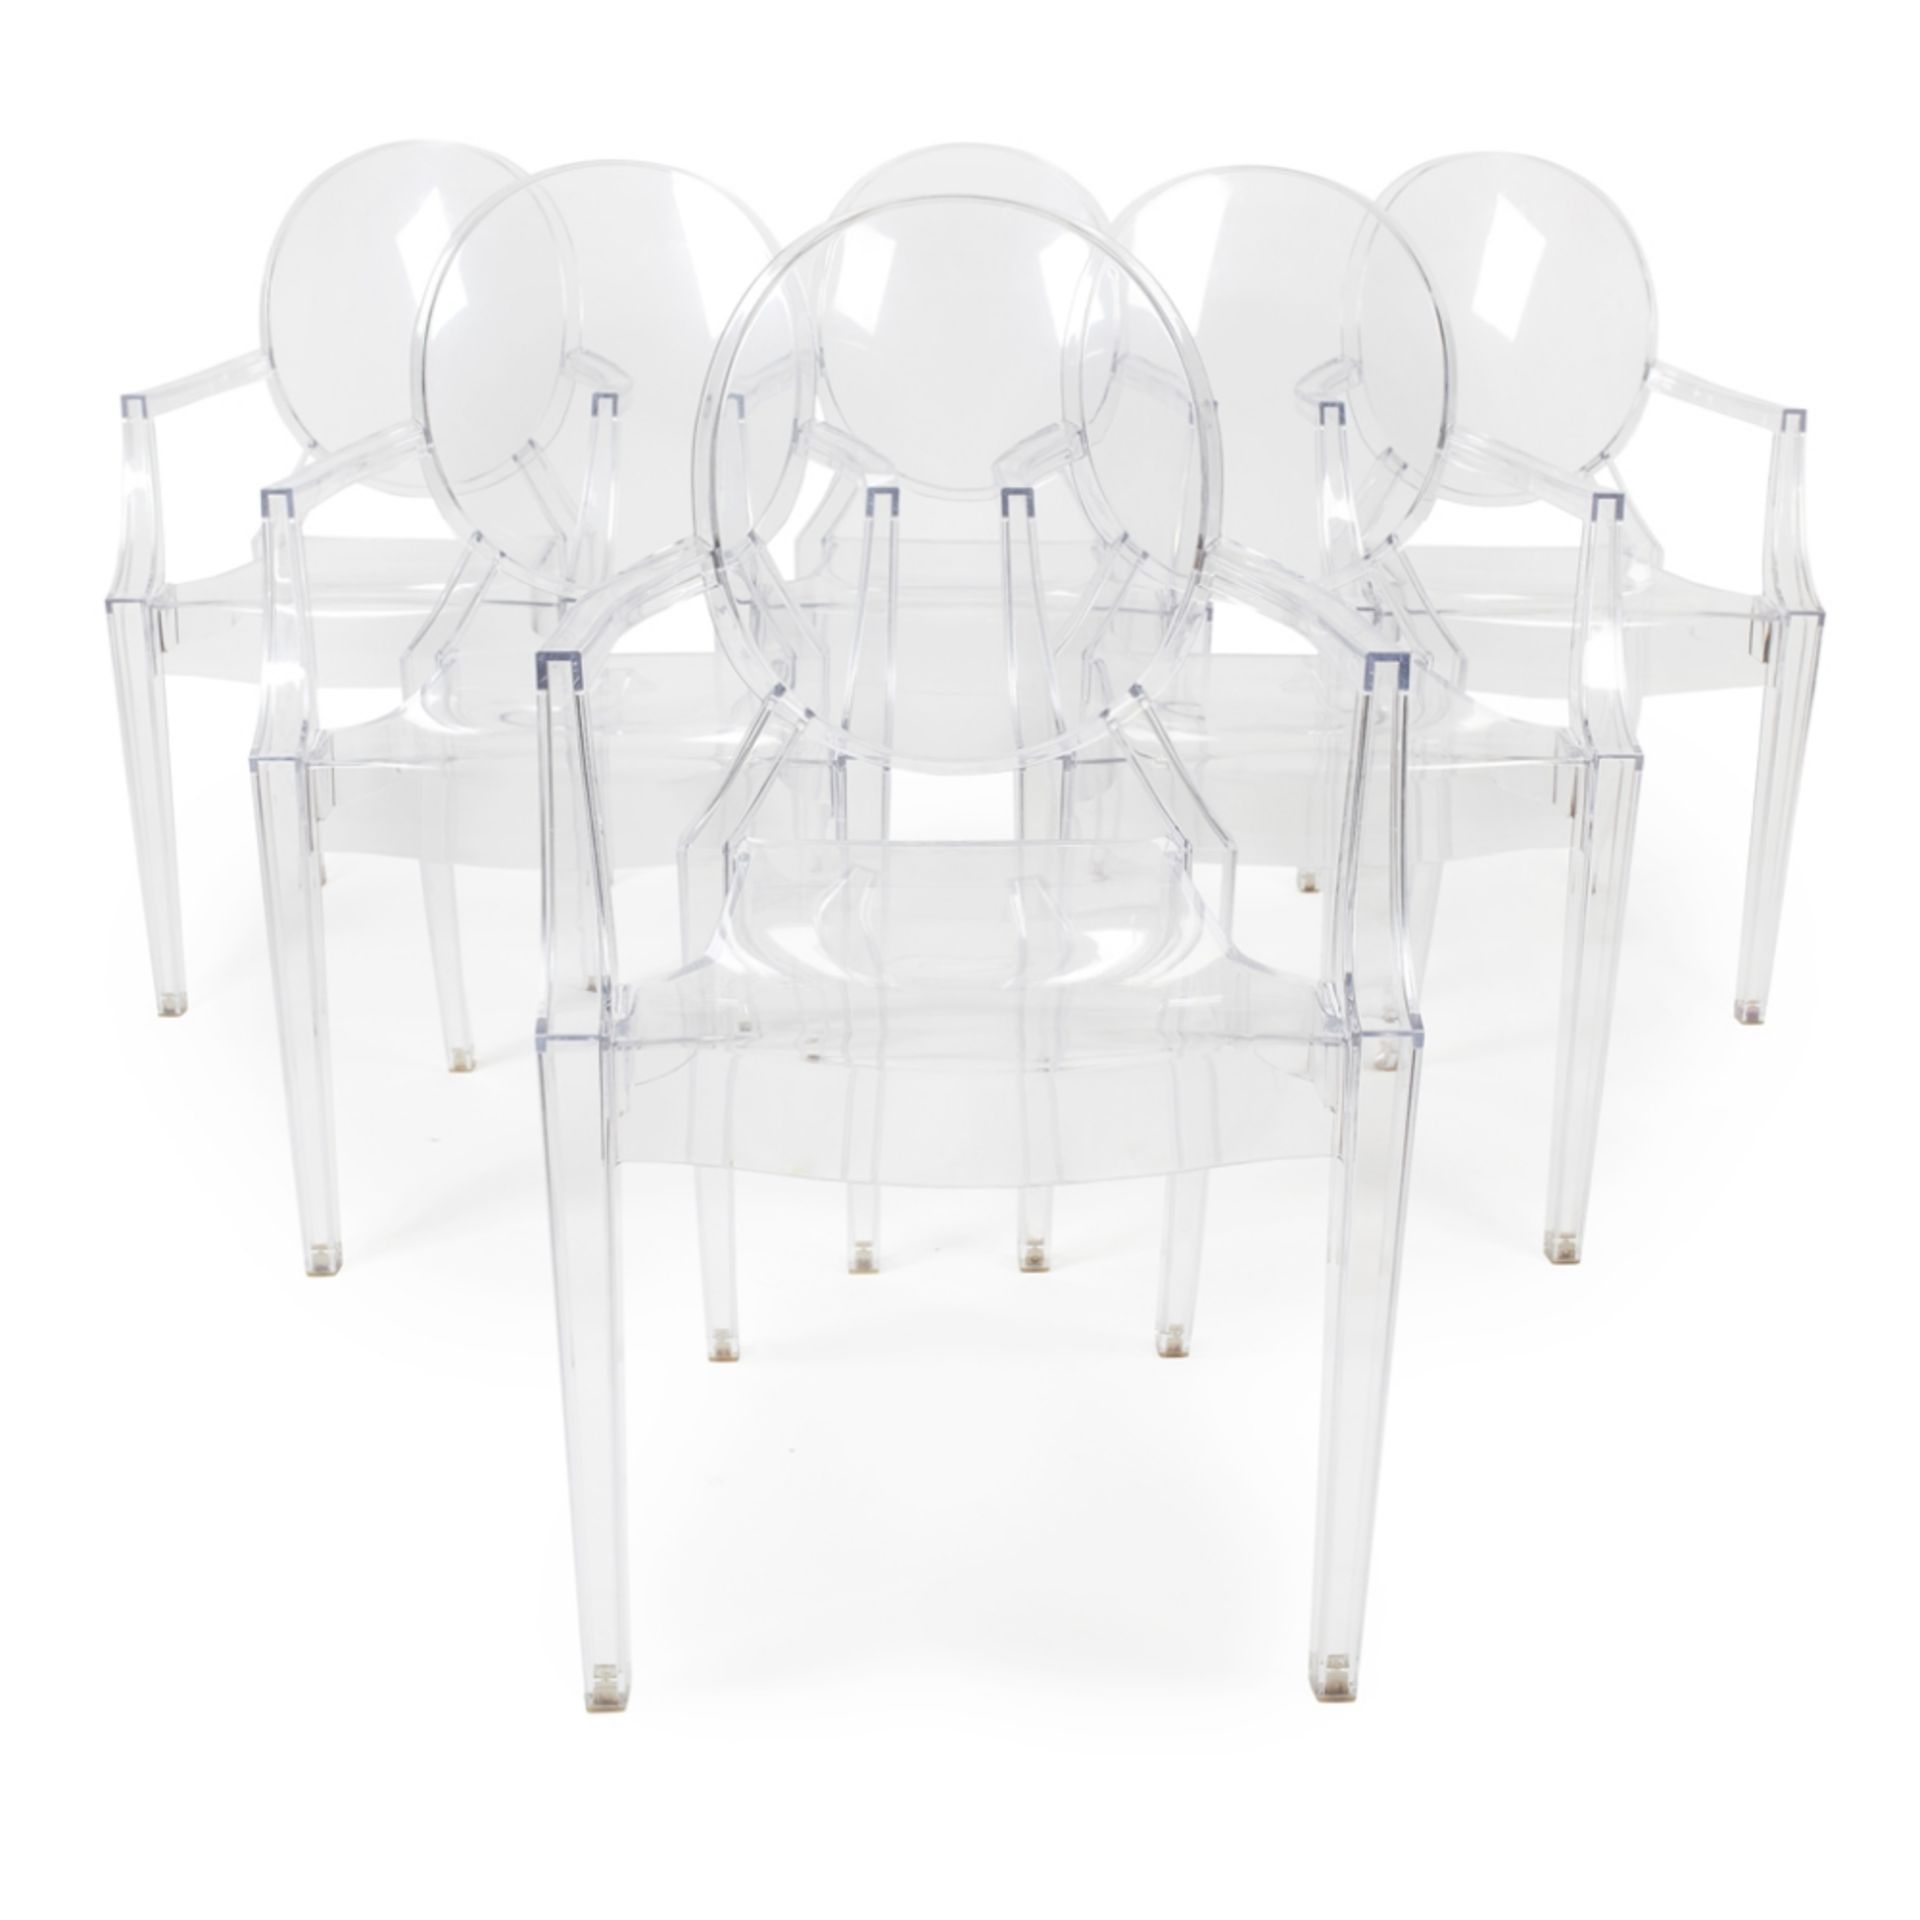 PHILIPPE STARCK (B. 1949) FOR KARTELL SET OF SIX ‘LOUIS GHOST’ ARMCHAIRS, DESIGNED 2003 - Image 2 of 2